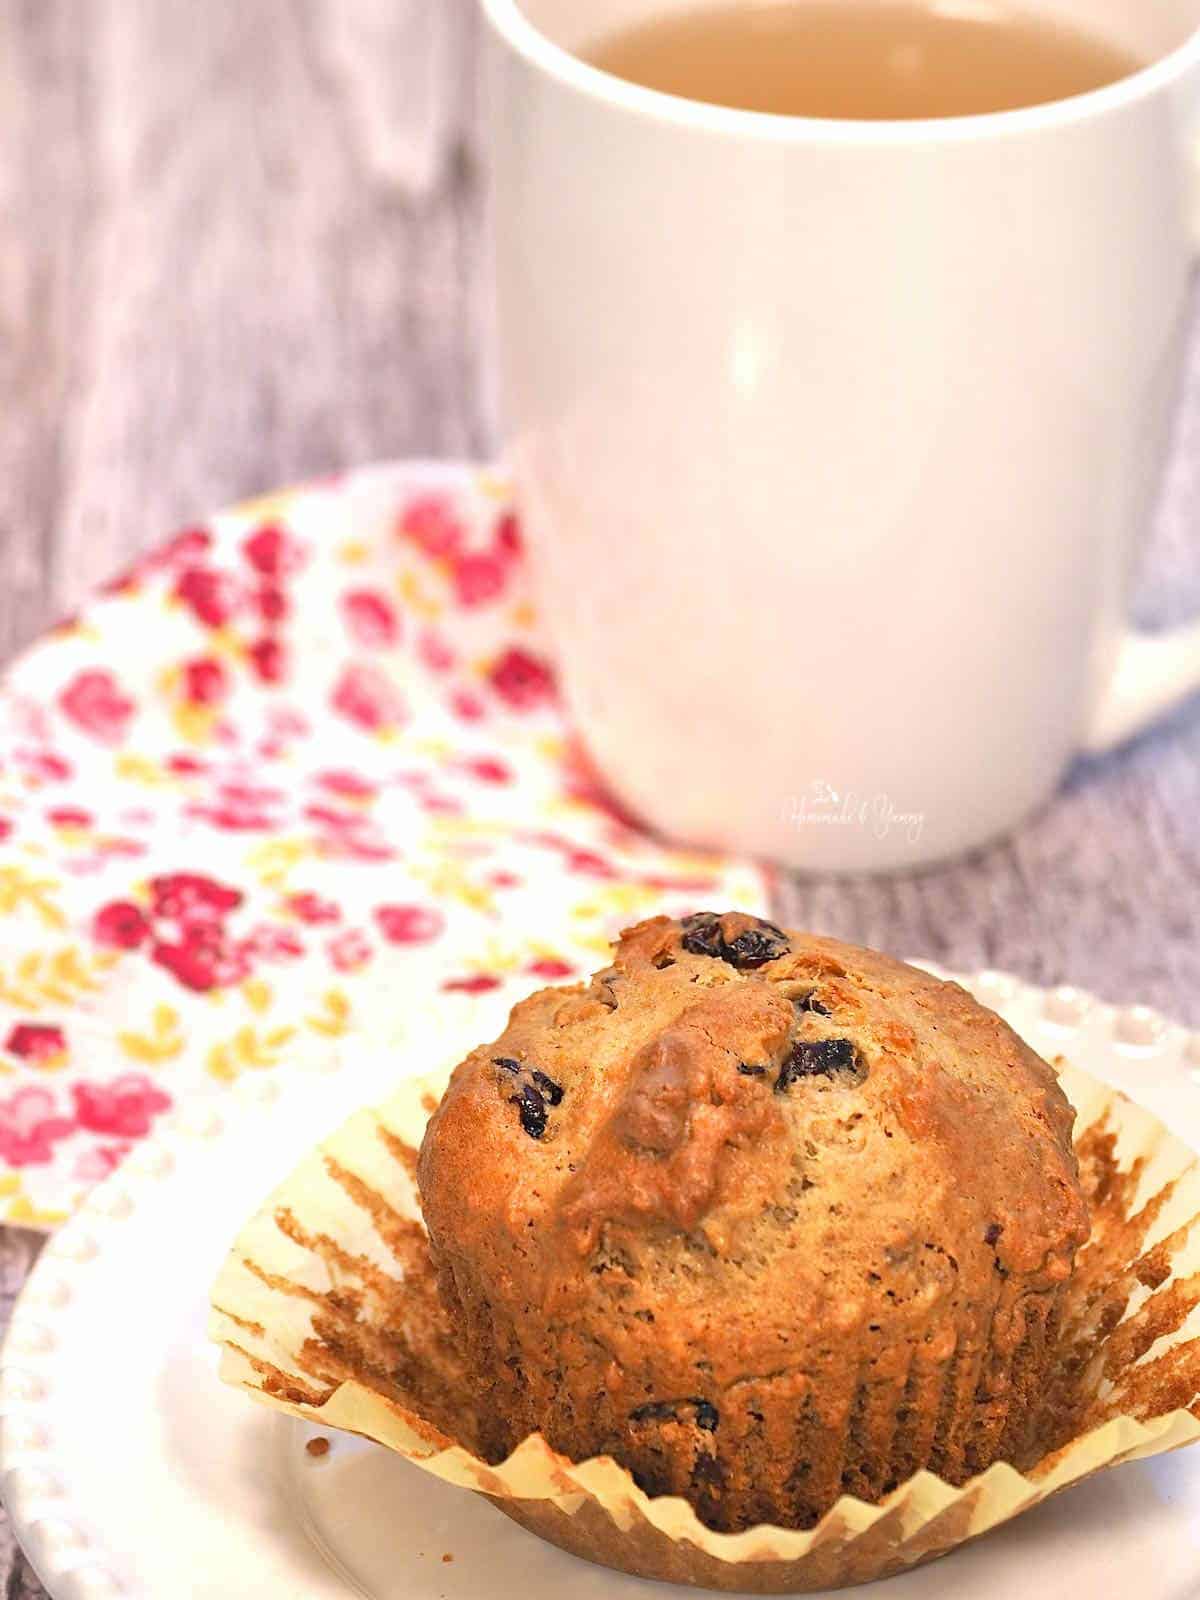 Freshly baked bran flake and cranberry muffin with a cup of tea.